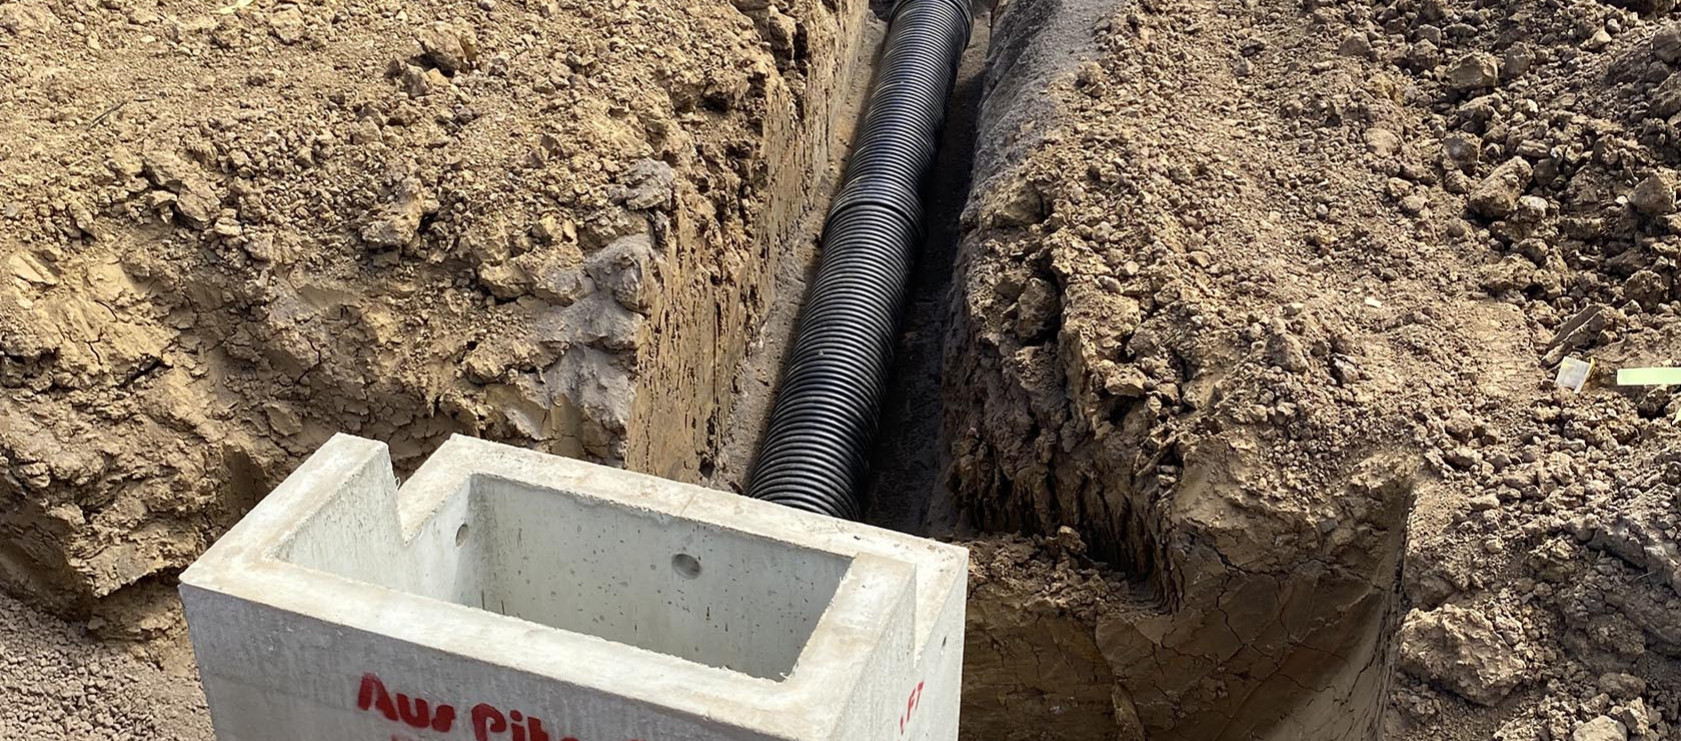 BlackMAX installed underground into the trench